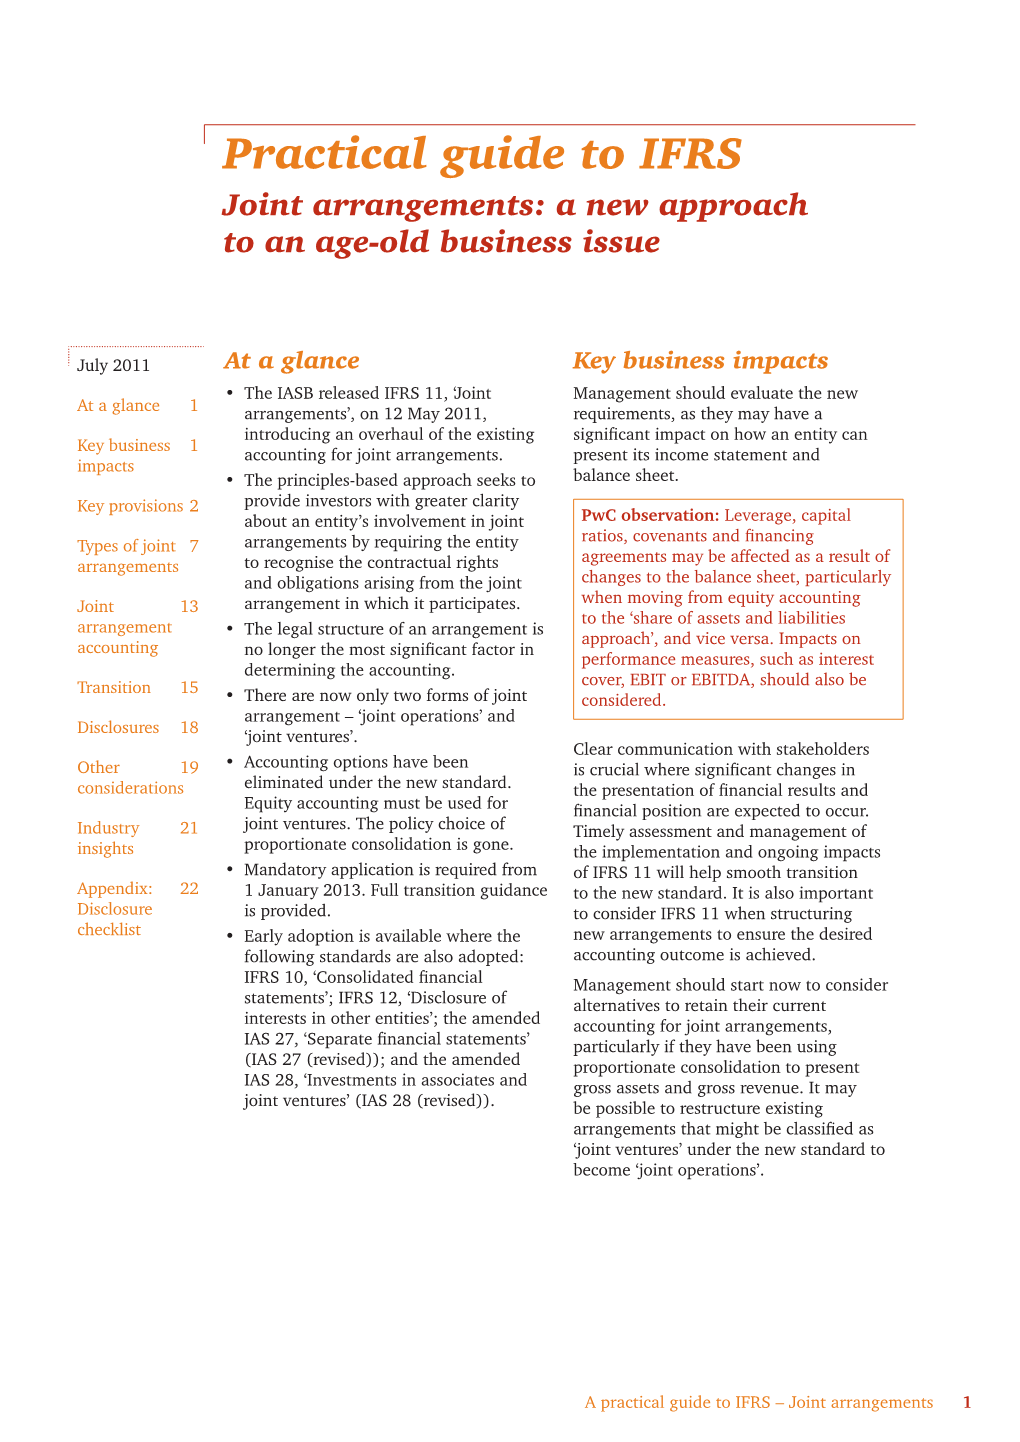 Practical Guide to IFRS Joint Arrangements: a New Approach to an Age-Old Business Issue